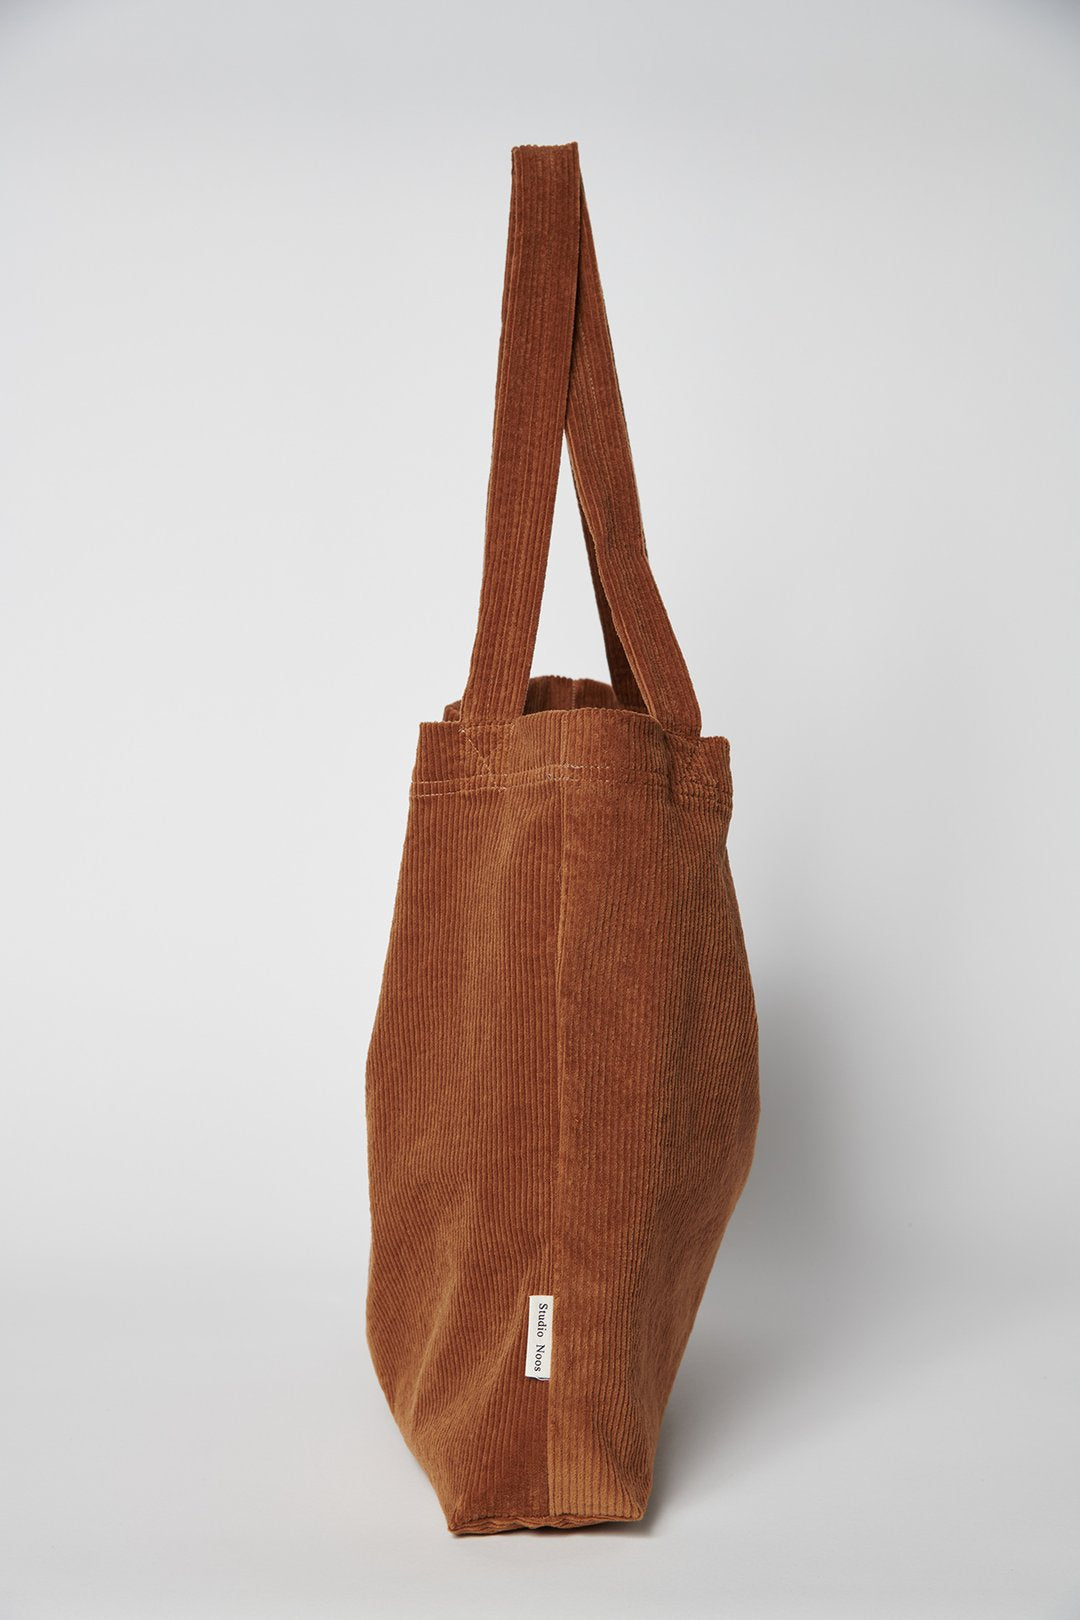 Large shopper bag with handles brown rib fabric